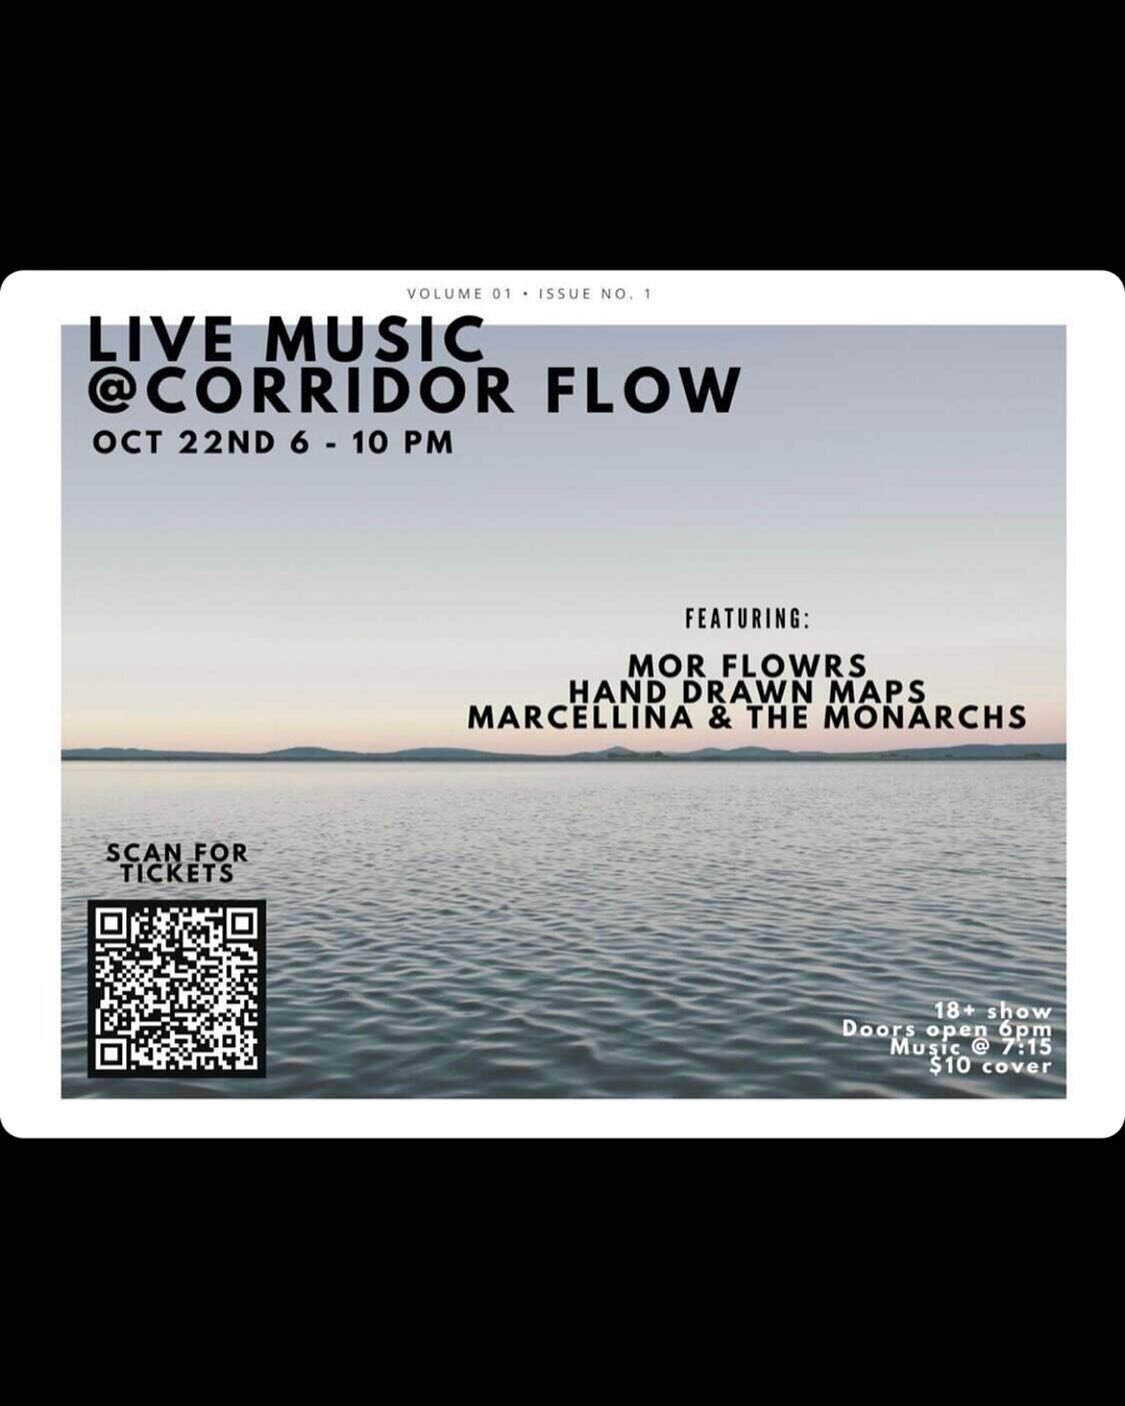 @corridor_flow on October 22nd! Gonna be playing a stripped down set alongside other incredible artists like @morflowrsmusic and @marcellinaandthemonarchs . Grab your tickets now! Link in bio